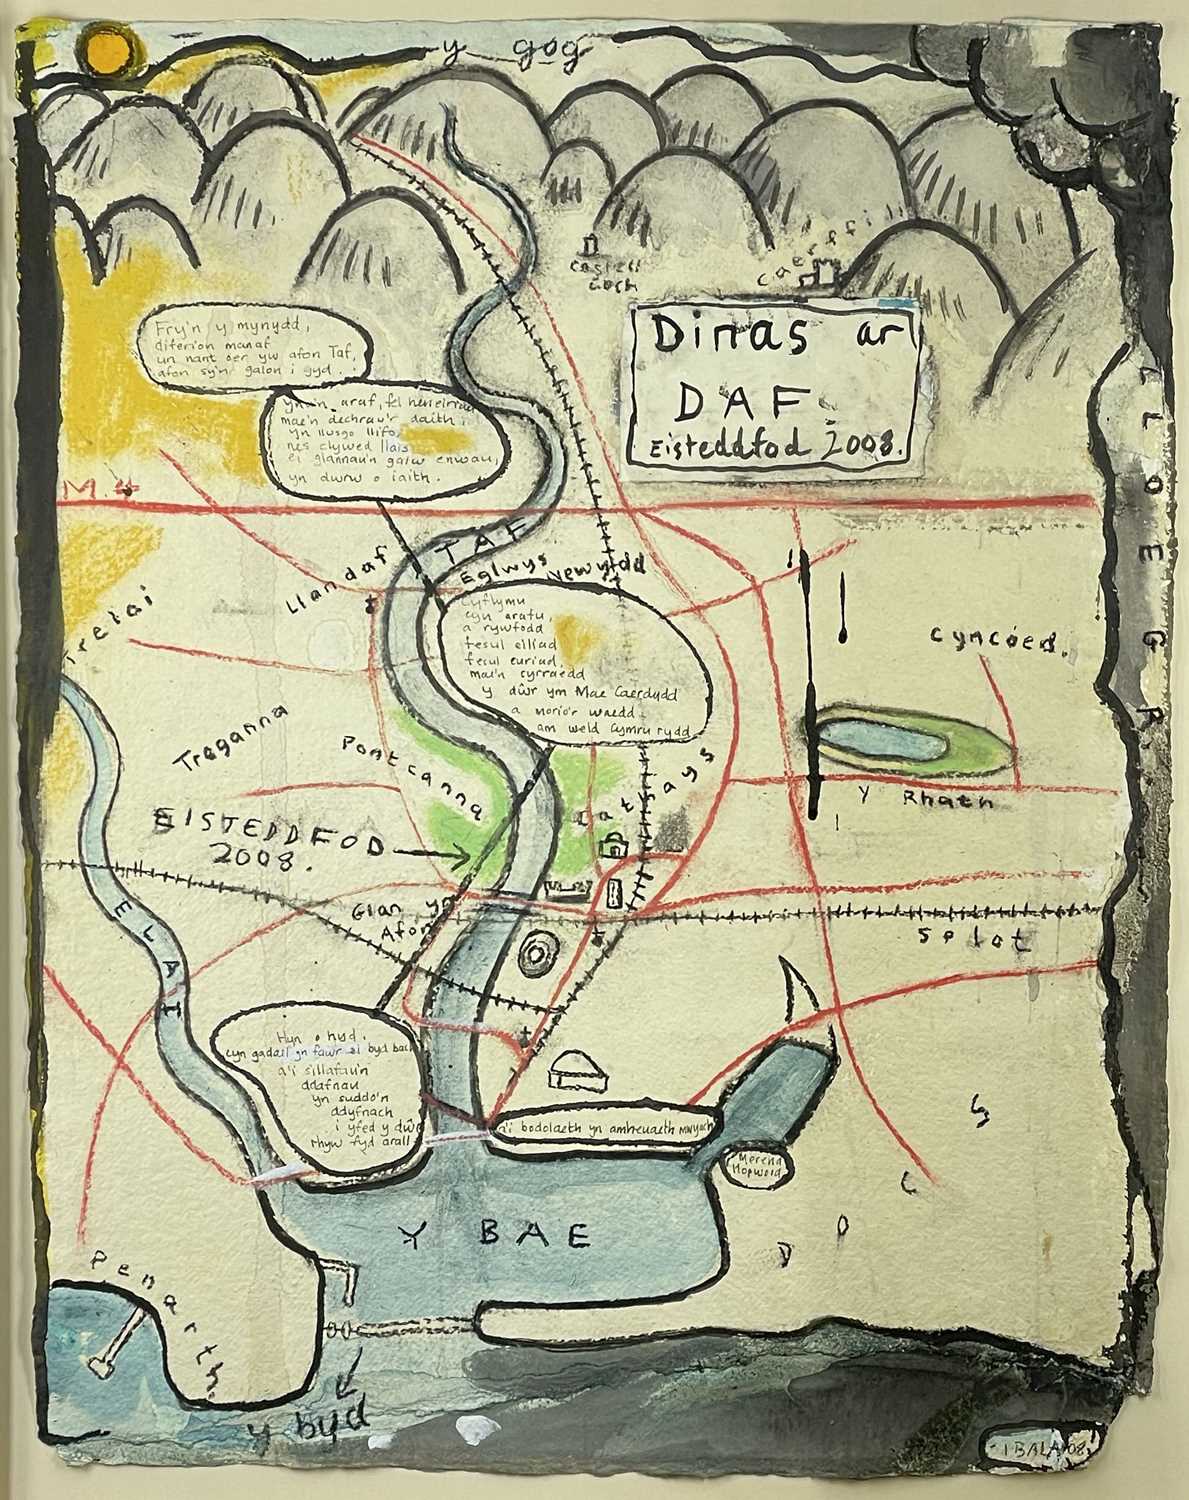 ‡ IWAN BALA mixed media - stylised map of Cardiff with verses, entitled 'Dinas ar Daf' relating to